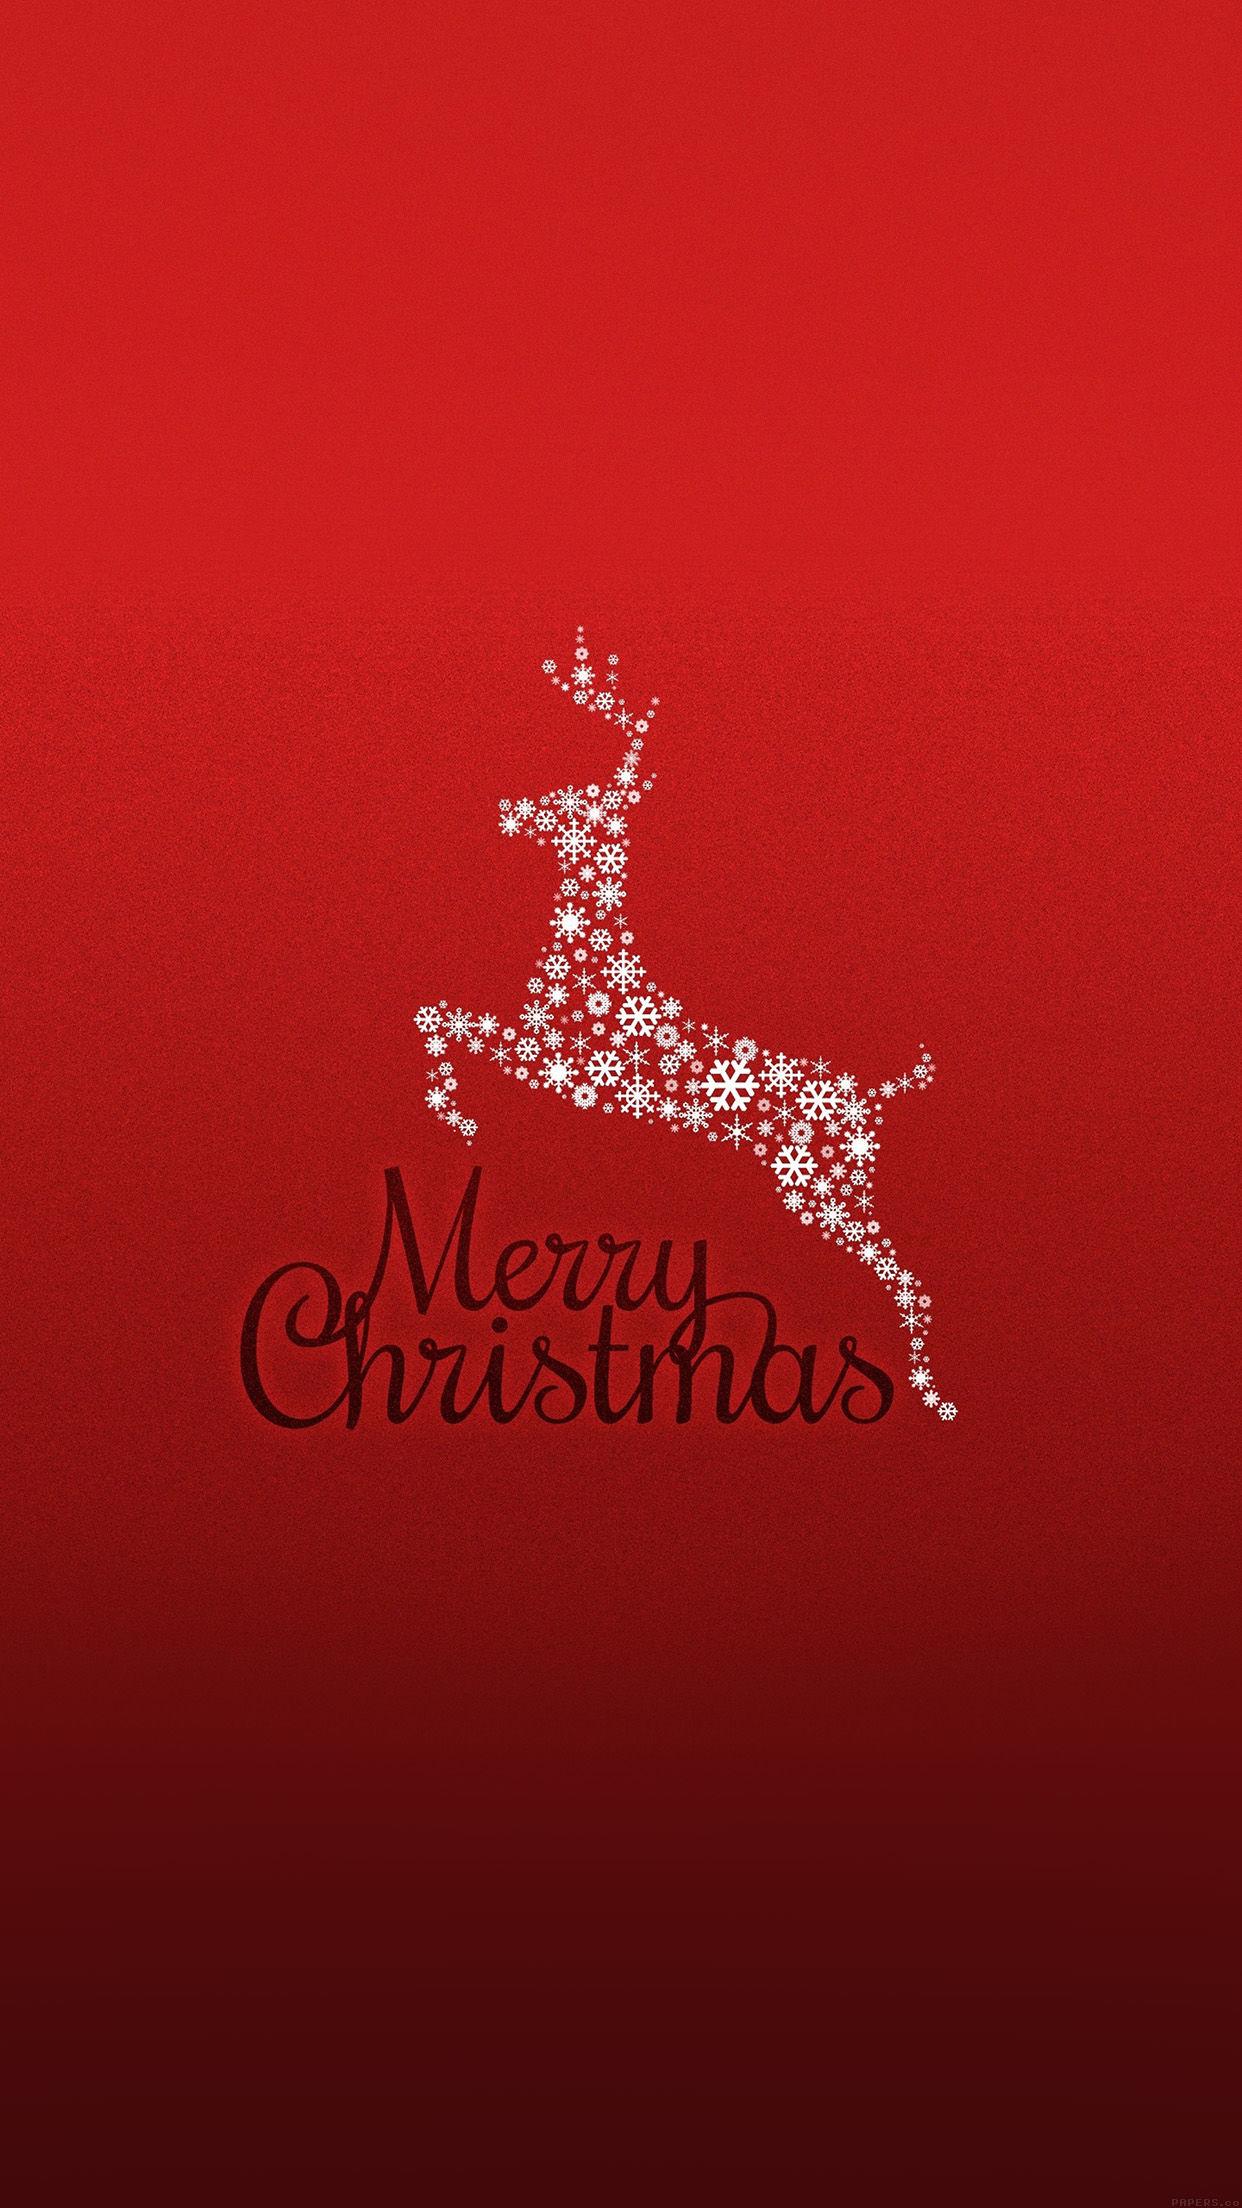 Merry Christmas Reindeer Wallpaper Picture, Photo